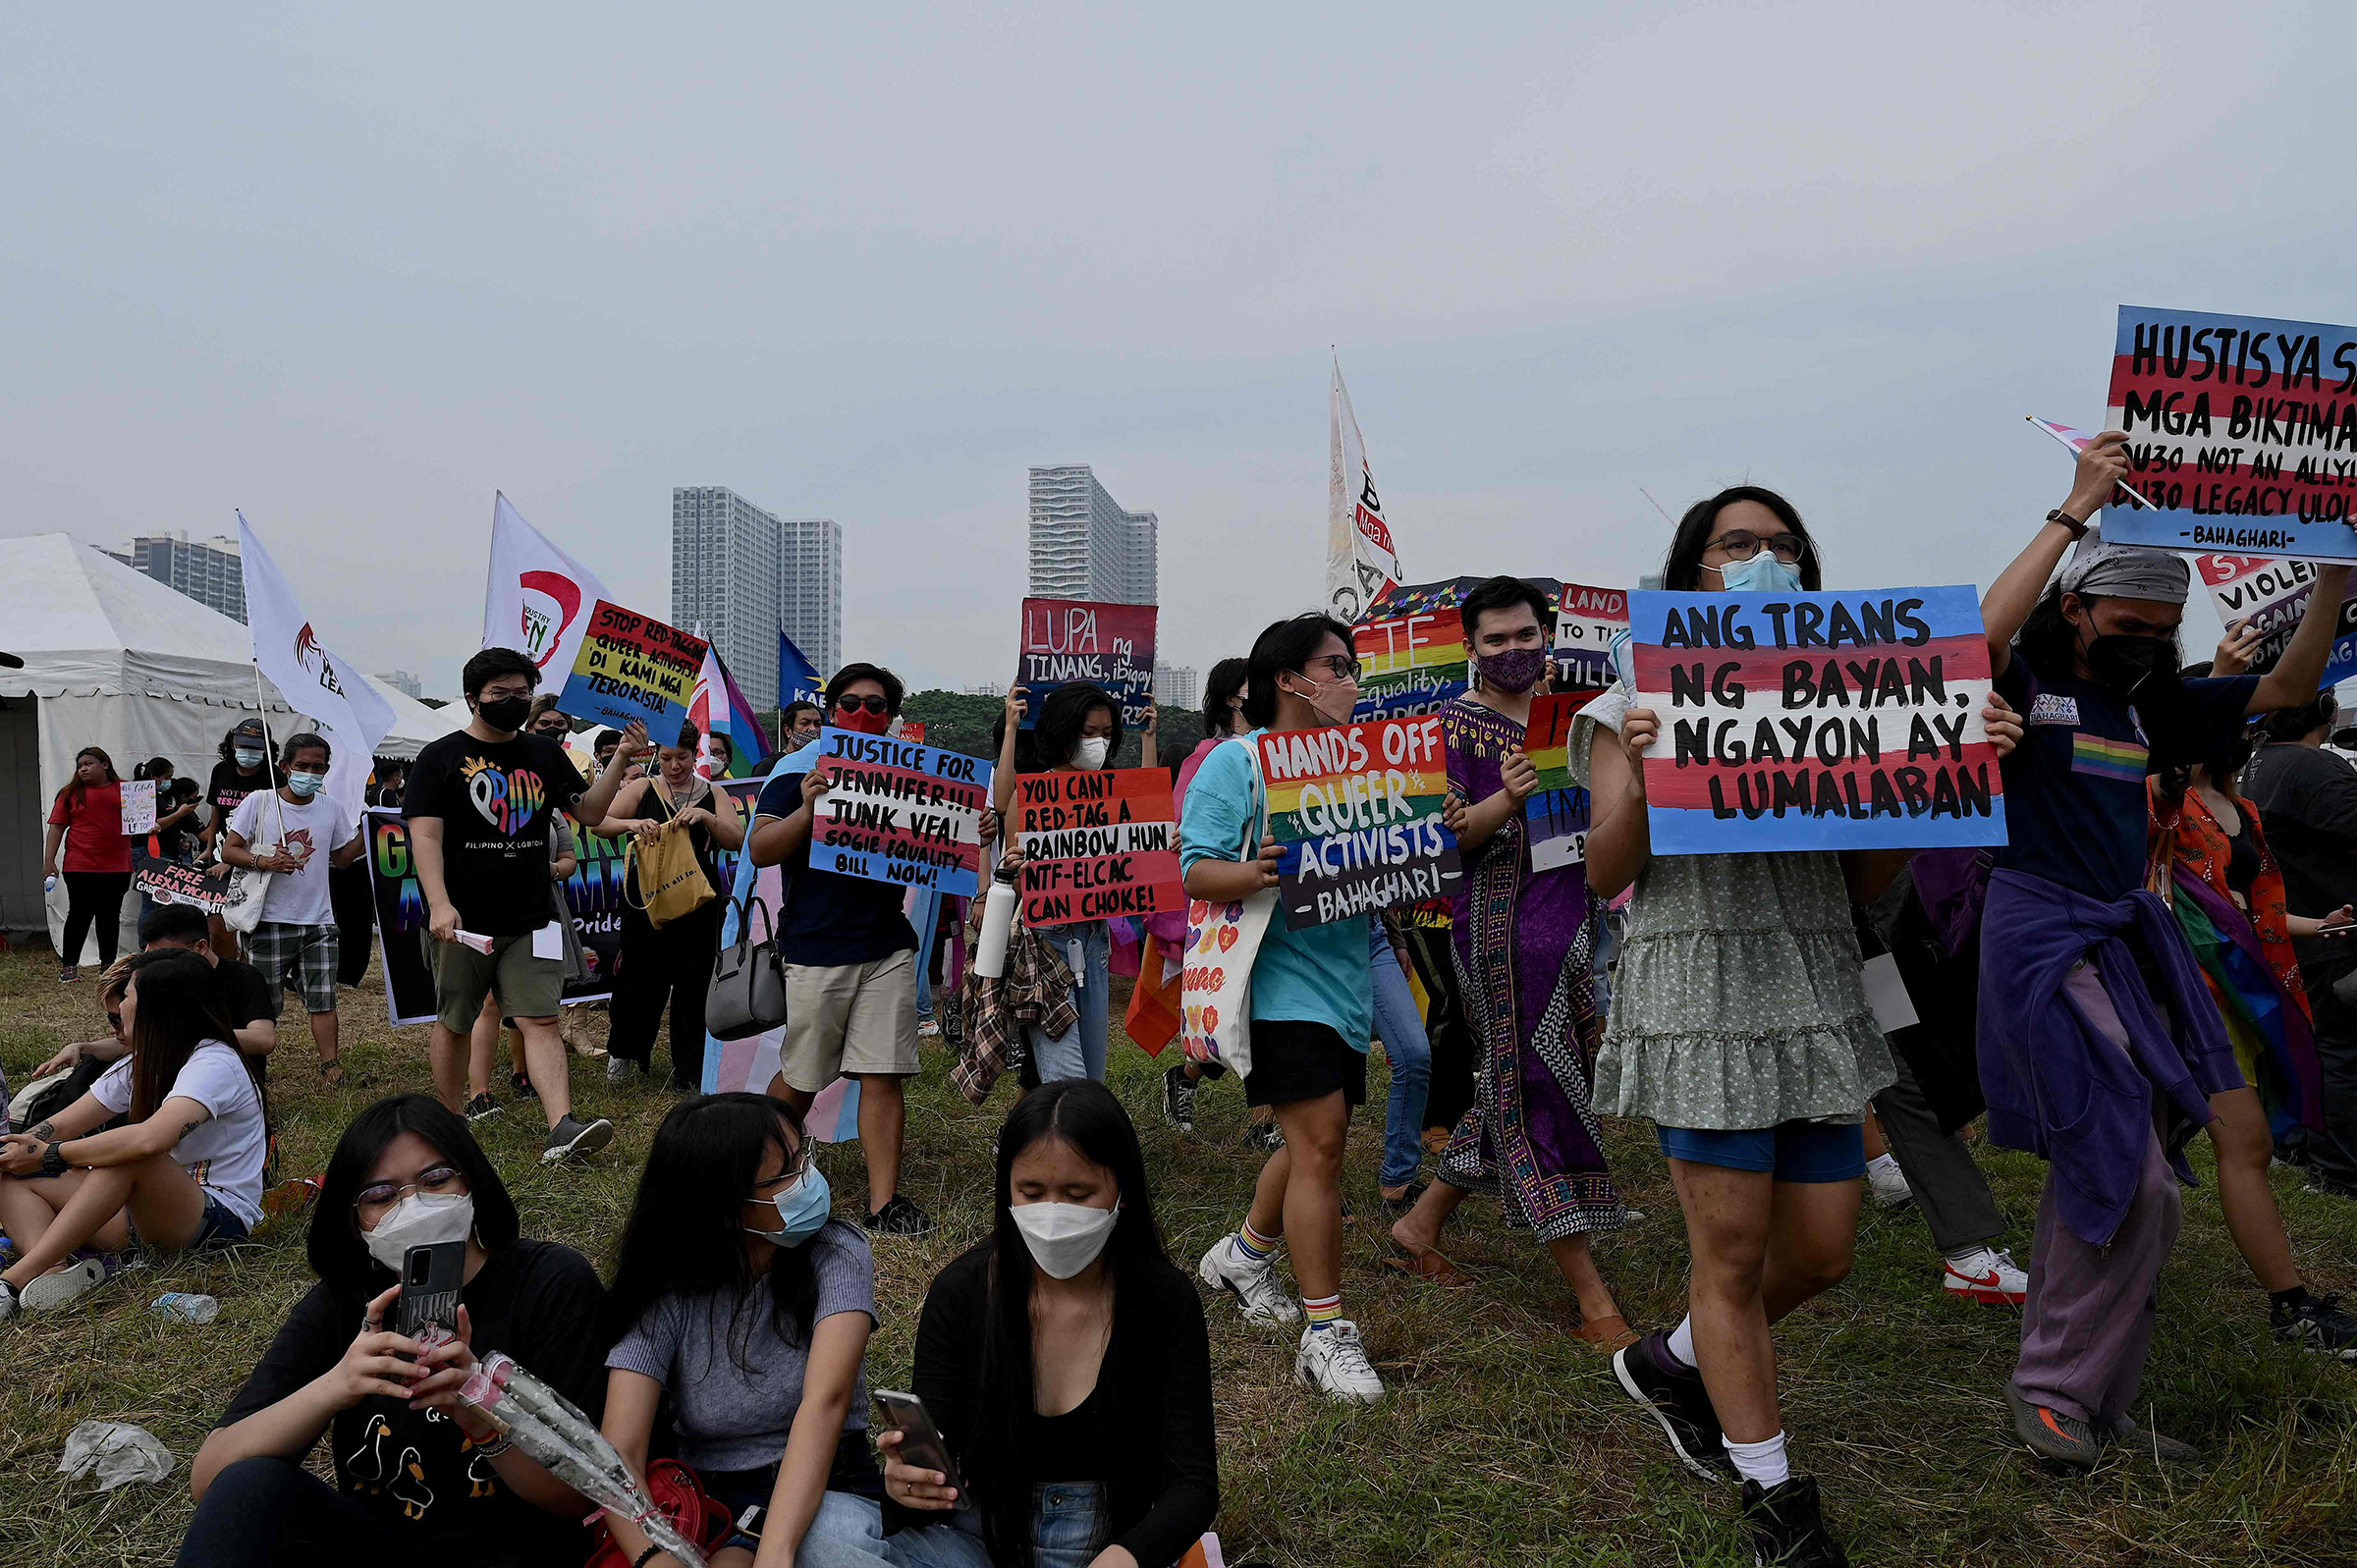 Members and supporters of the LGBT community participate in the Metro Manila Pride March in Pasay on June 25, 2022. (Jam Sta Rosa—AFP/Getty Images)